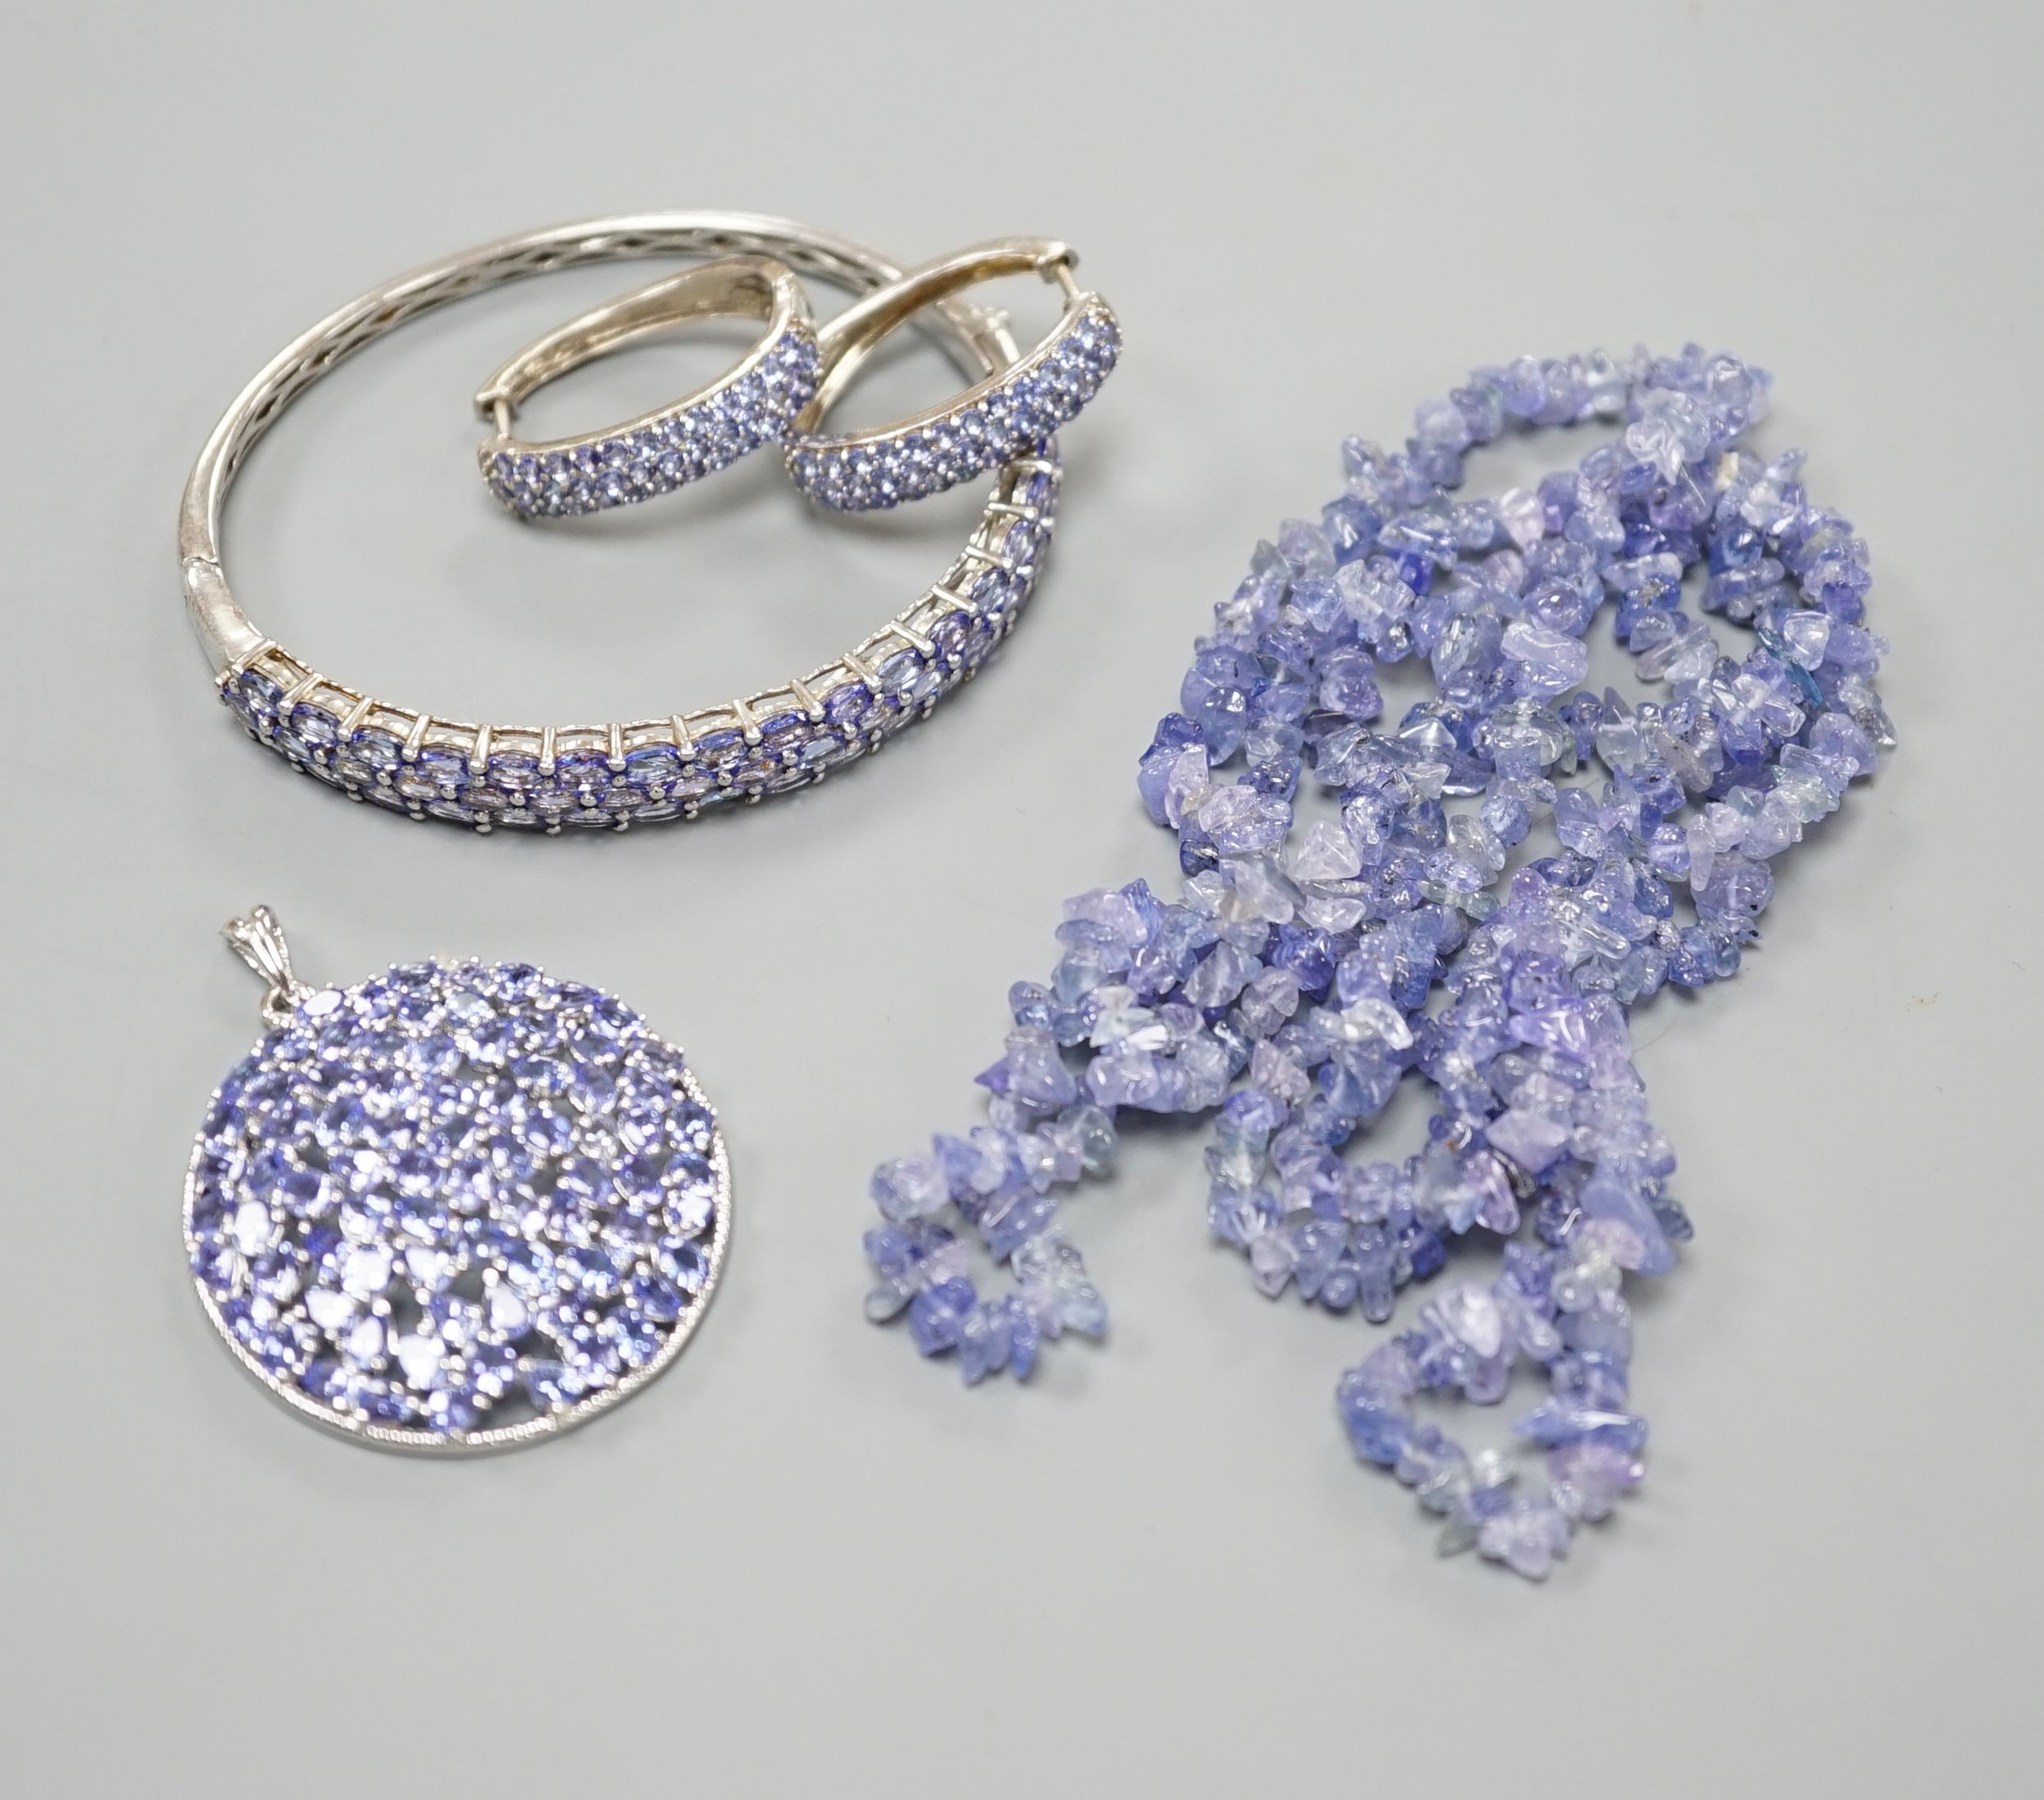 A modern 925 and tanzanite set hinged bangle, a similar pair of earrings and pendant and a rough cut tanzanite set necklace.